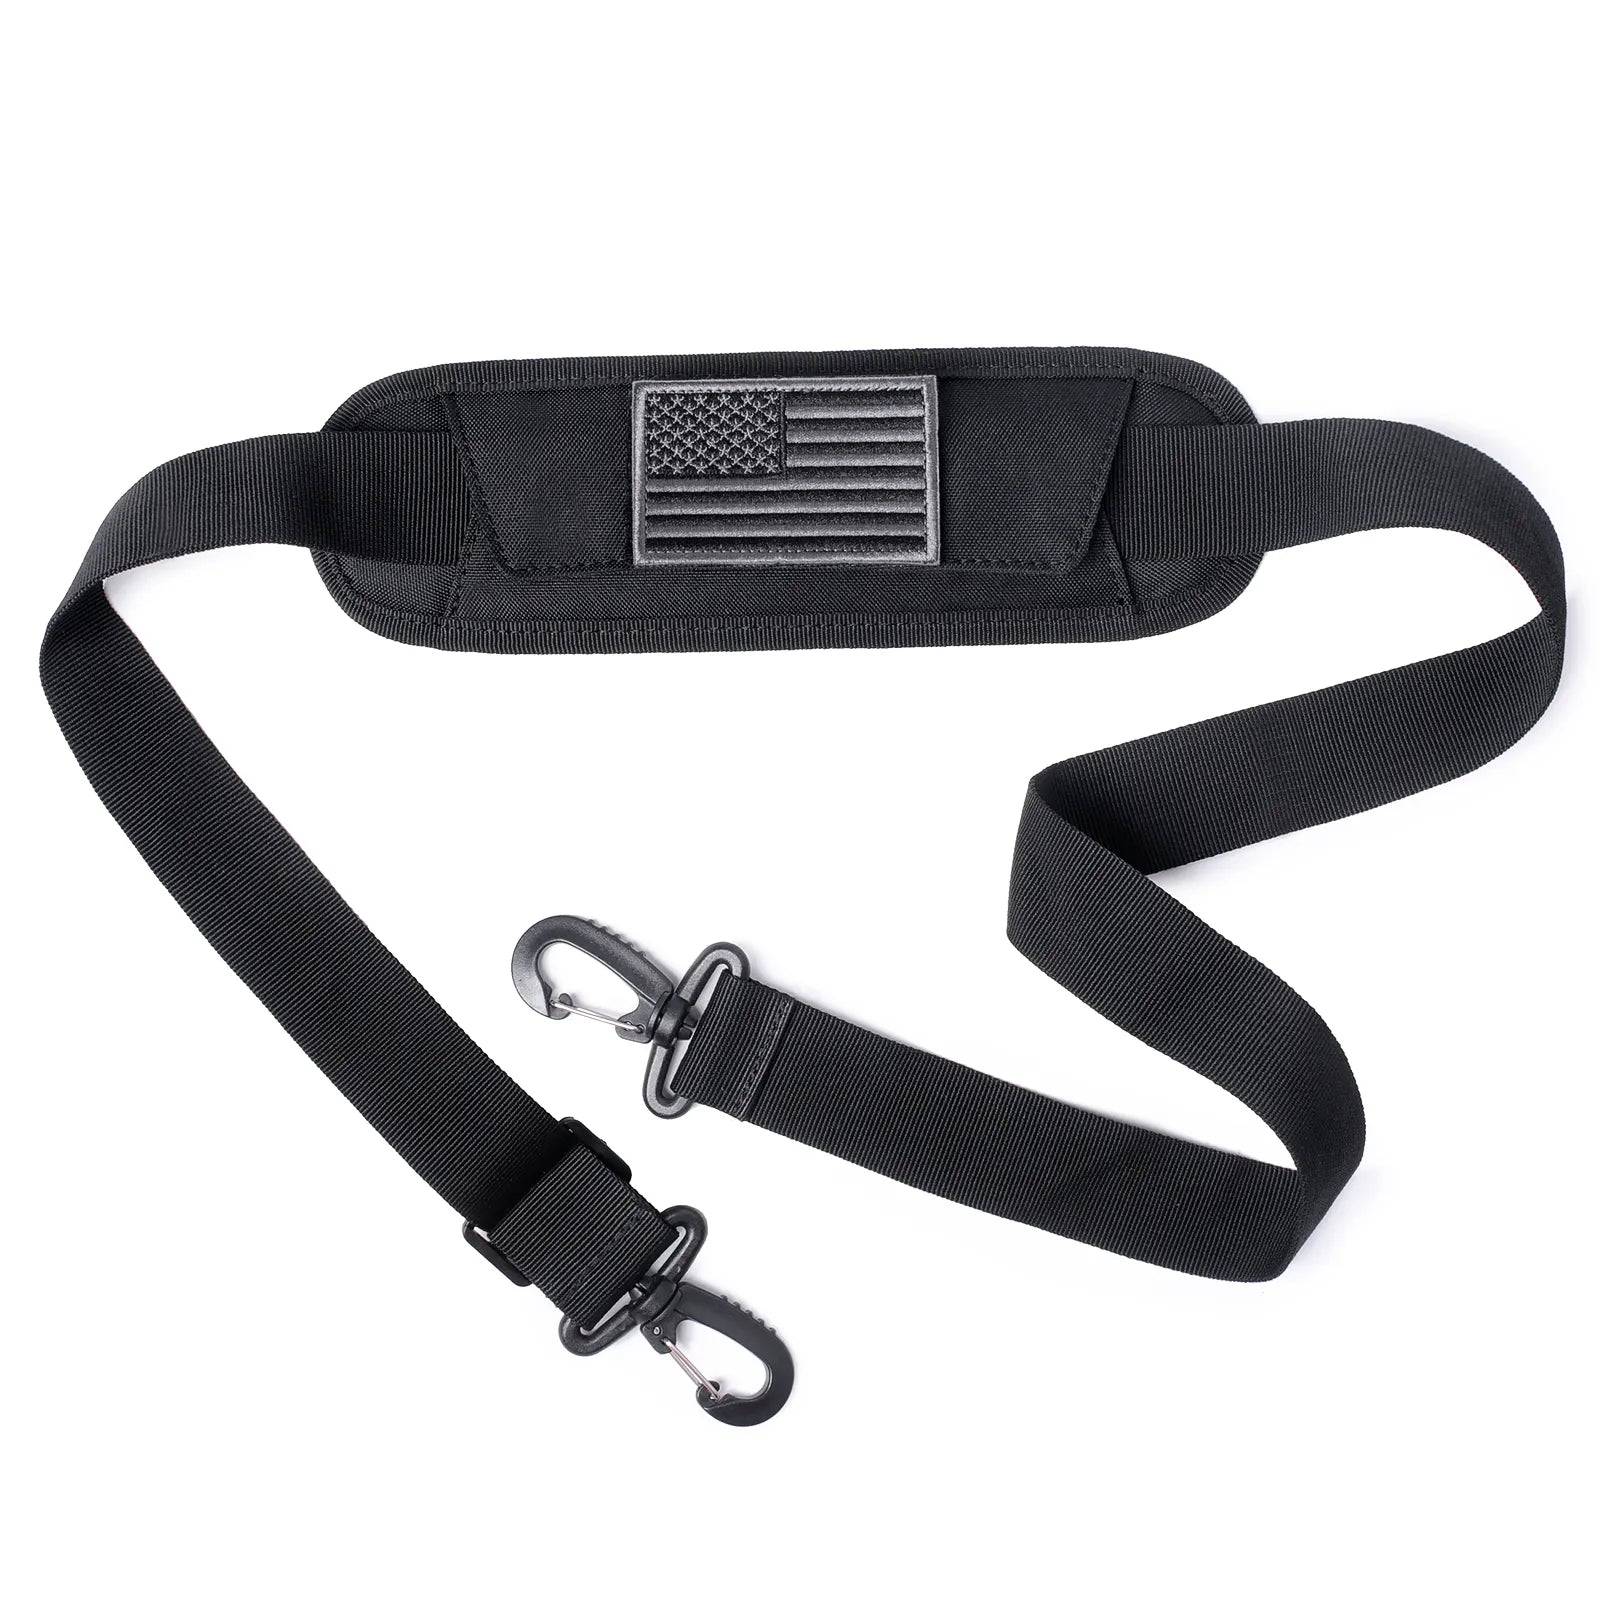 Camping Computer Travel Cycling Bag Replacement Belt